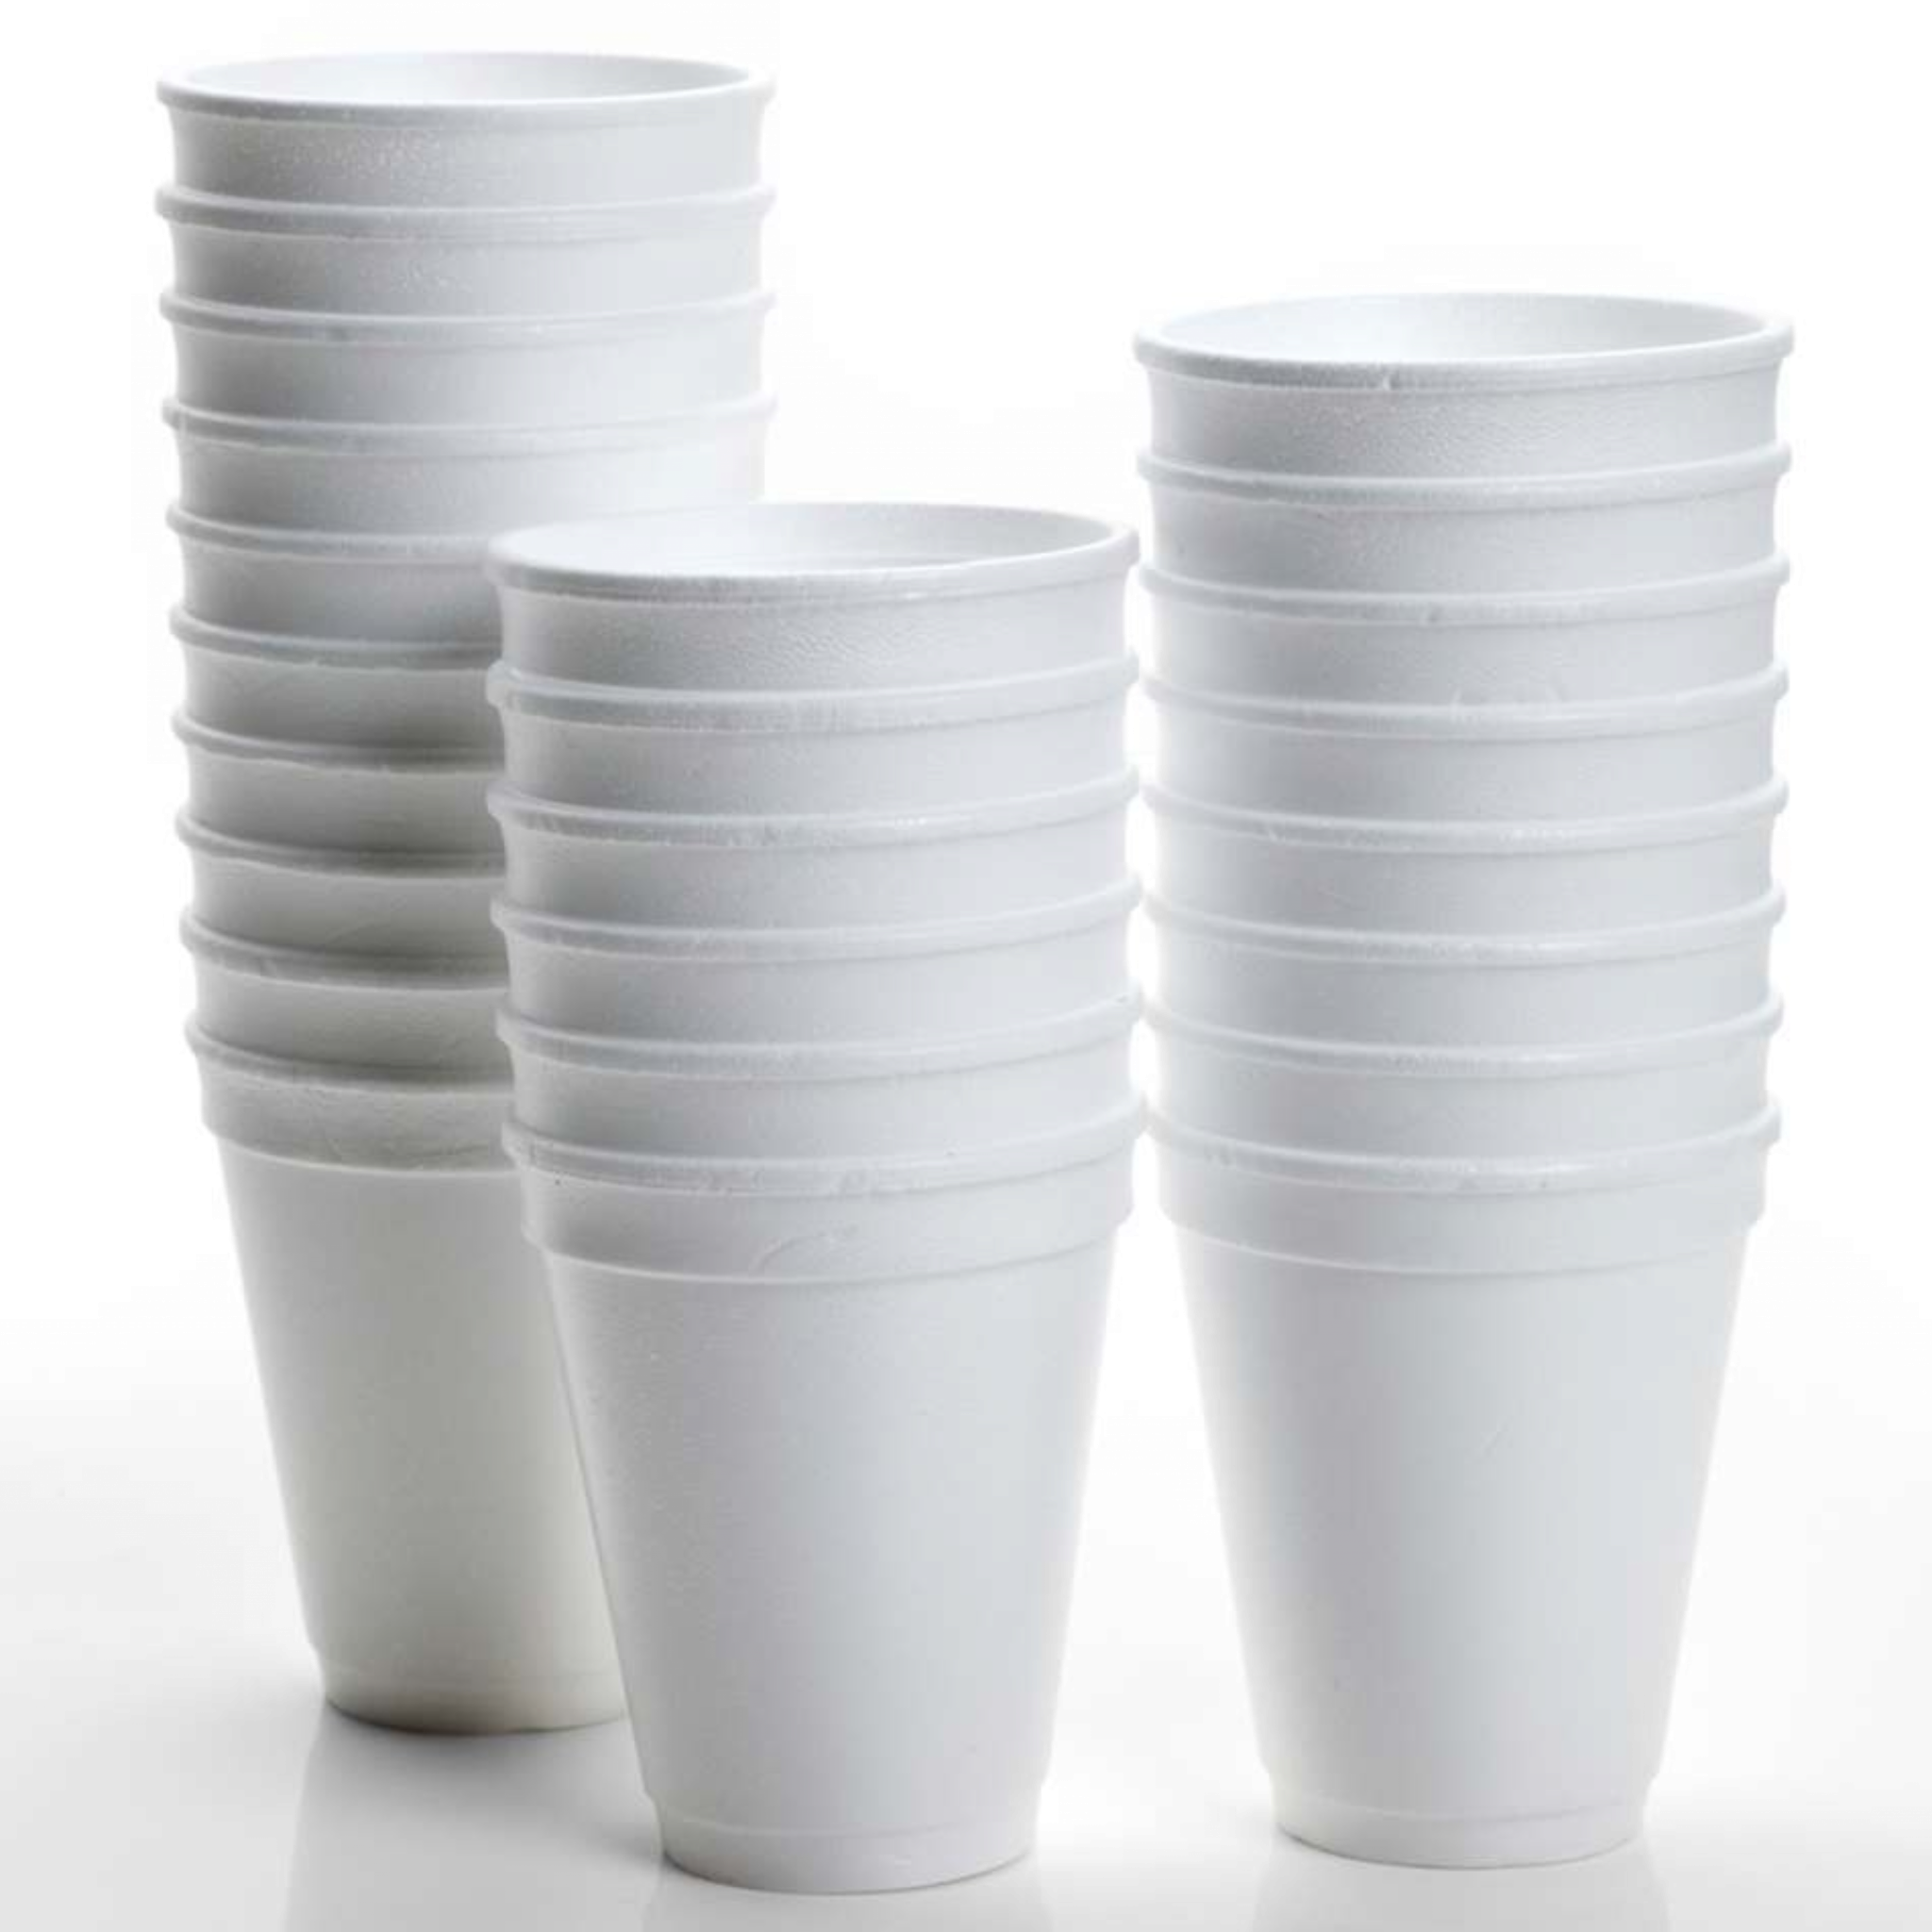 250ml Foam Cups Polystyrene HC.8 Disposable 100pack